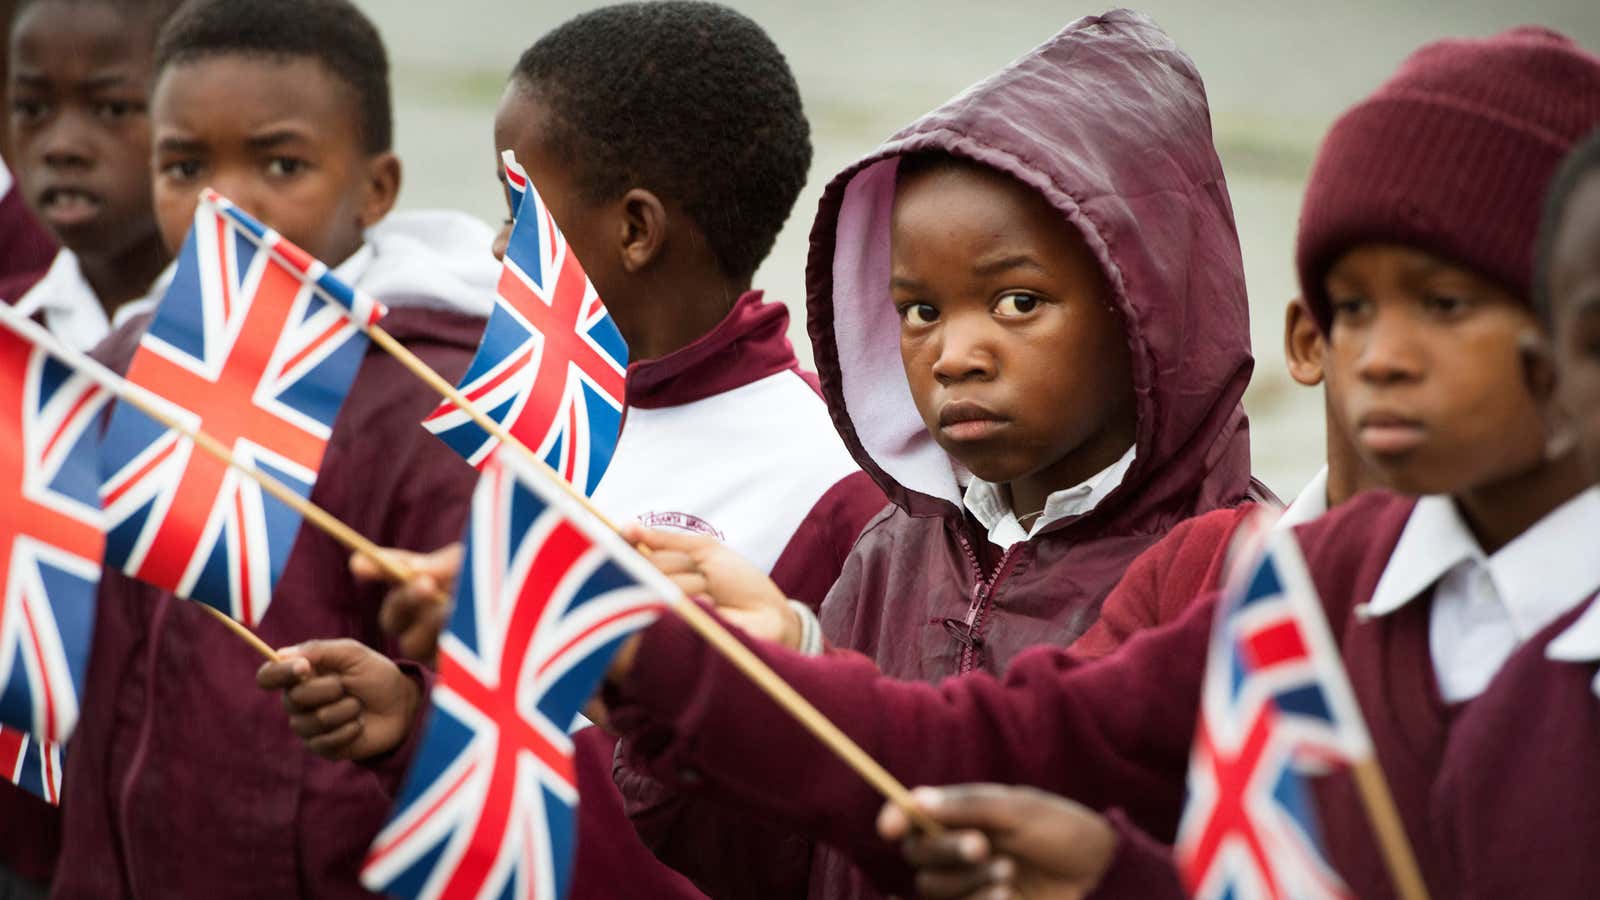 The UK’s future in Africa’s hands?